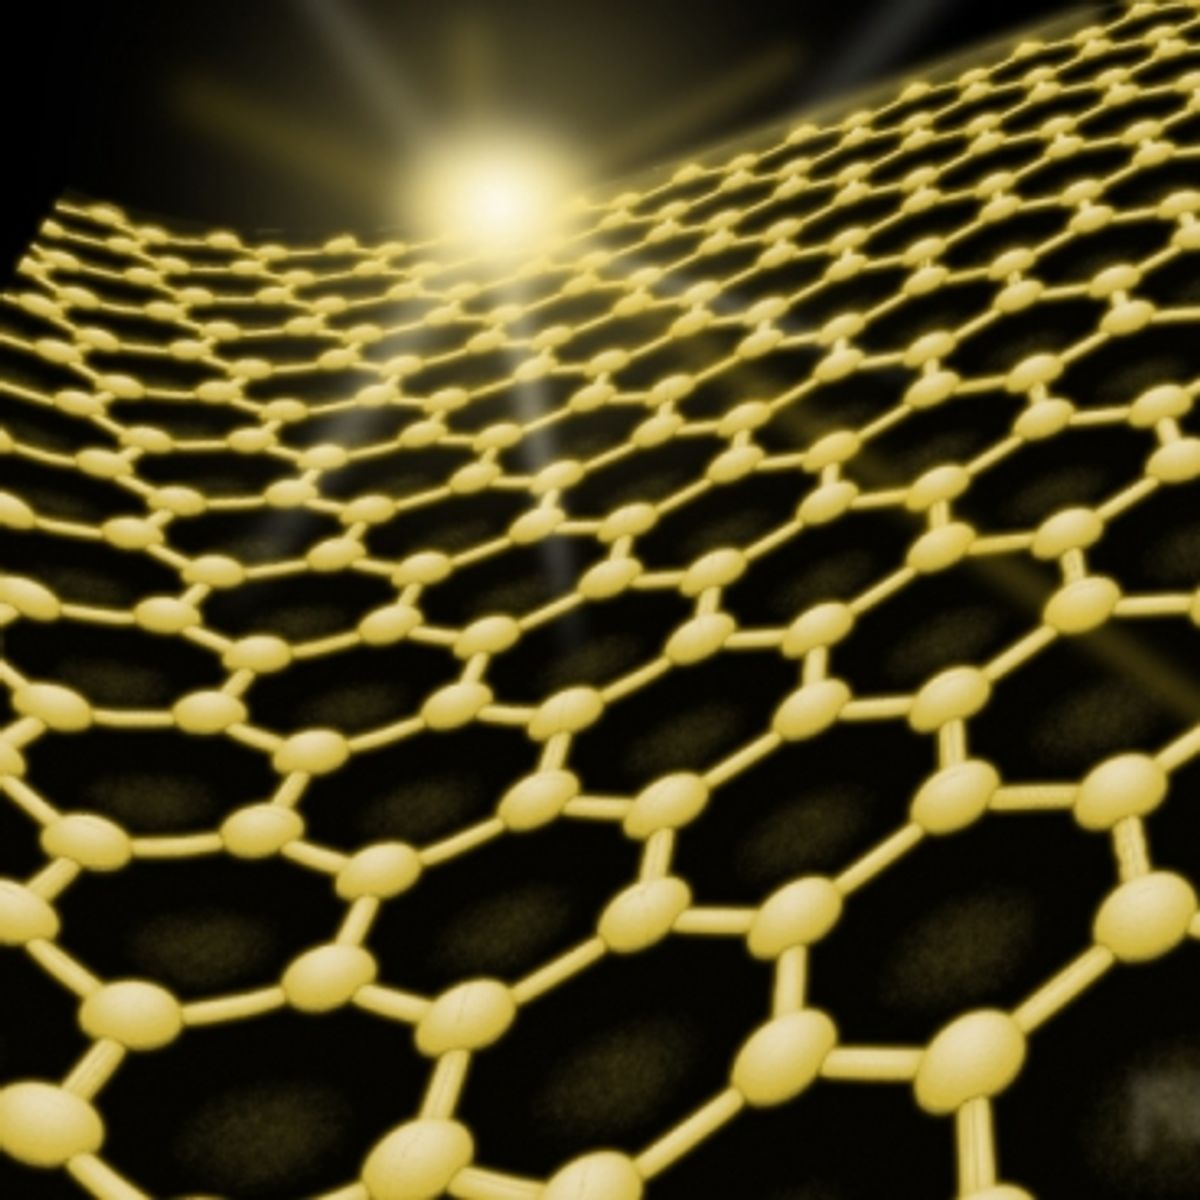 Graphene for Electrodes in Organic Solar Cells Could Reduce Costs